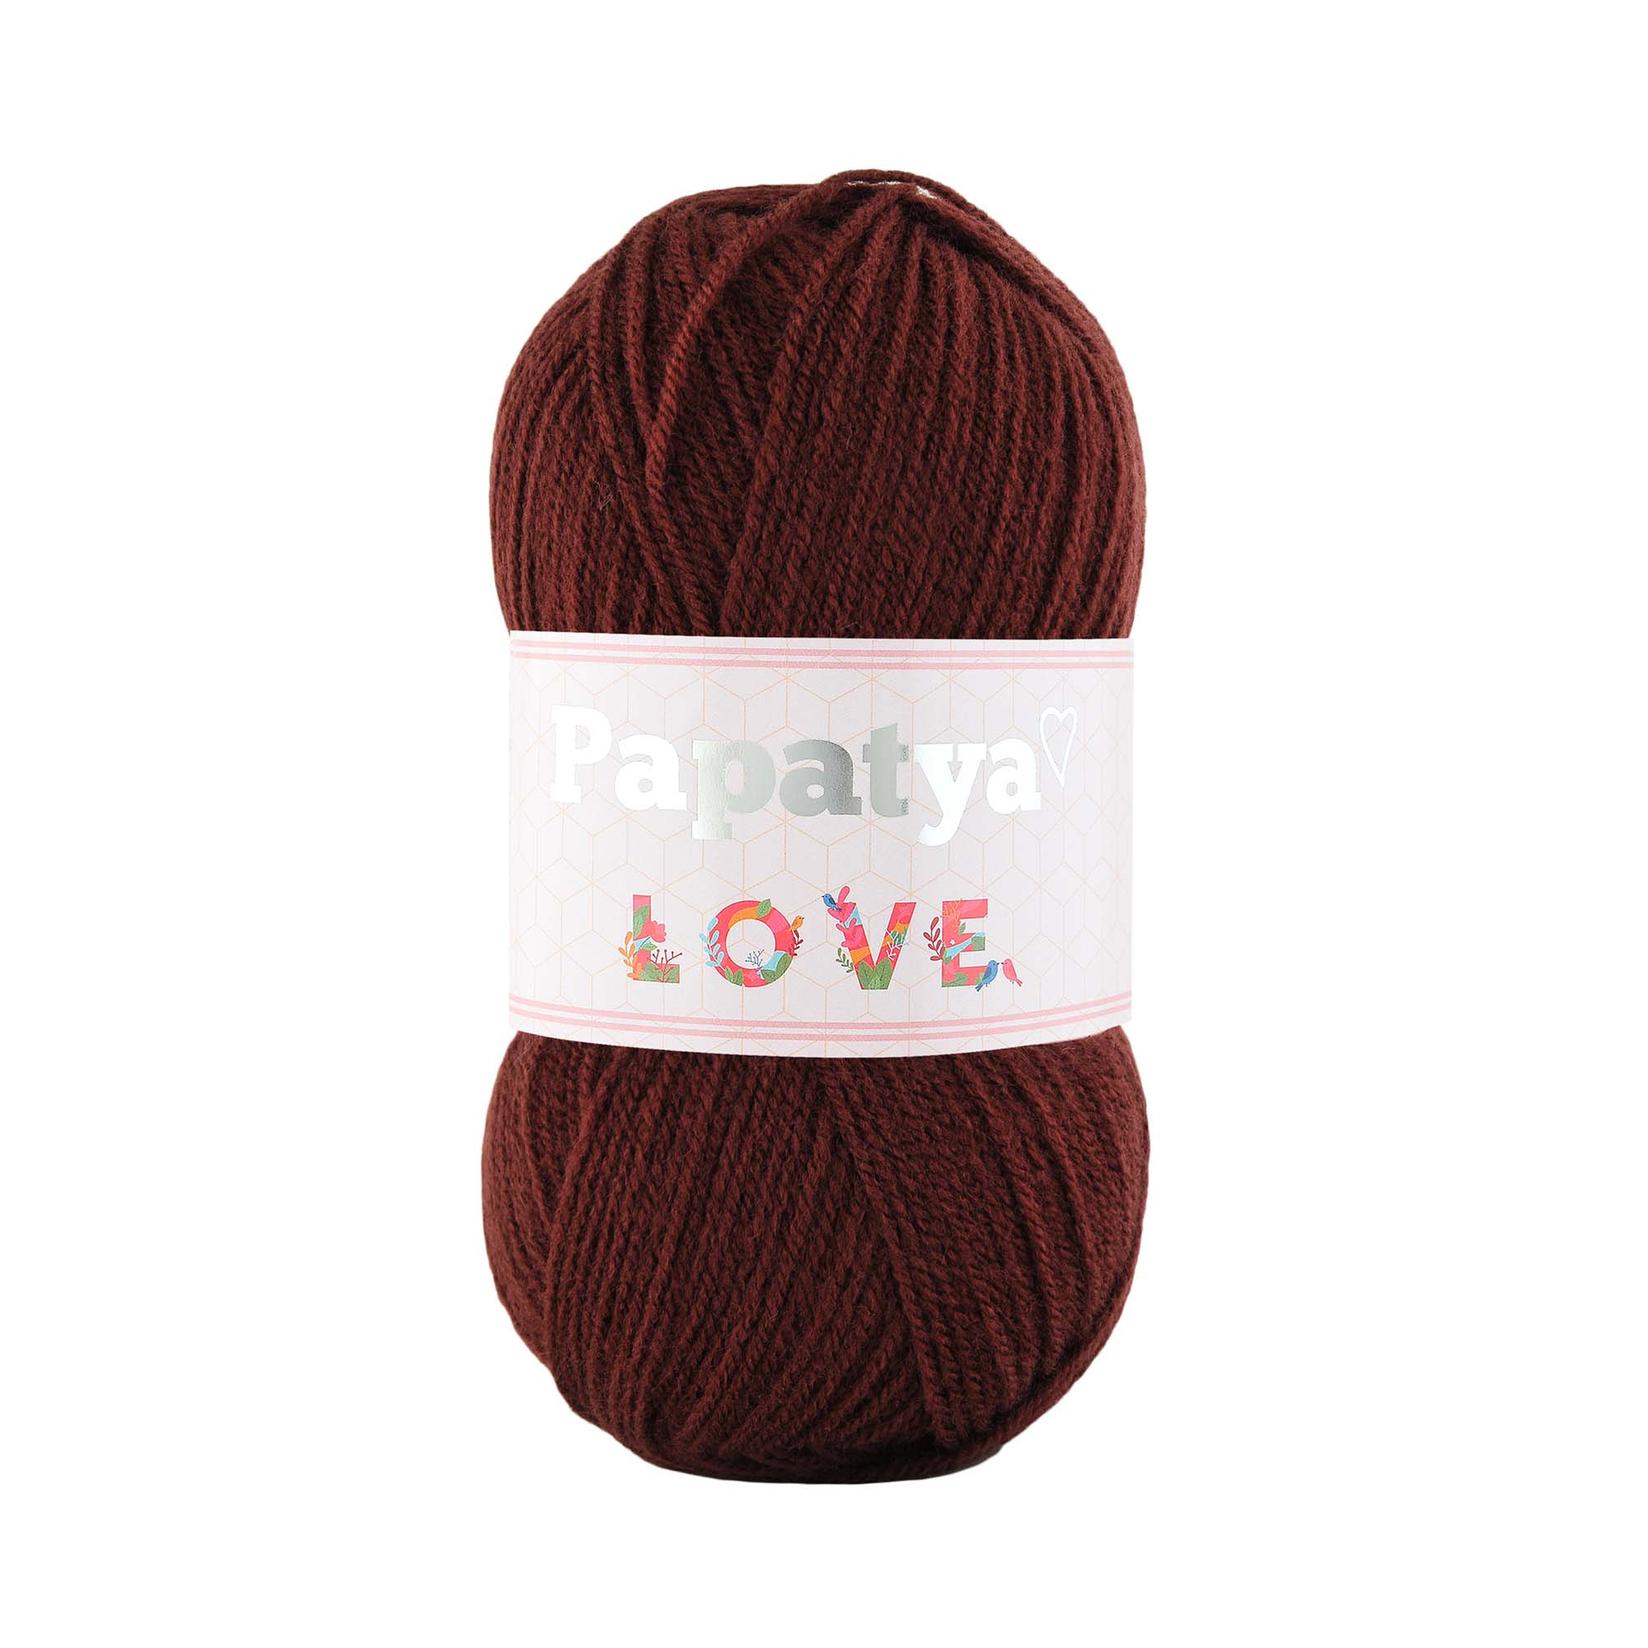 Selected image for PAPATYA Vunica Love 3280